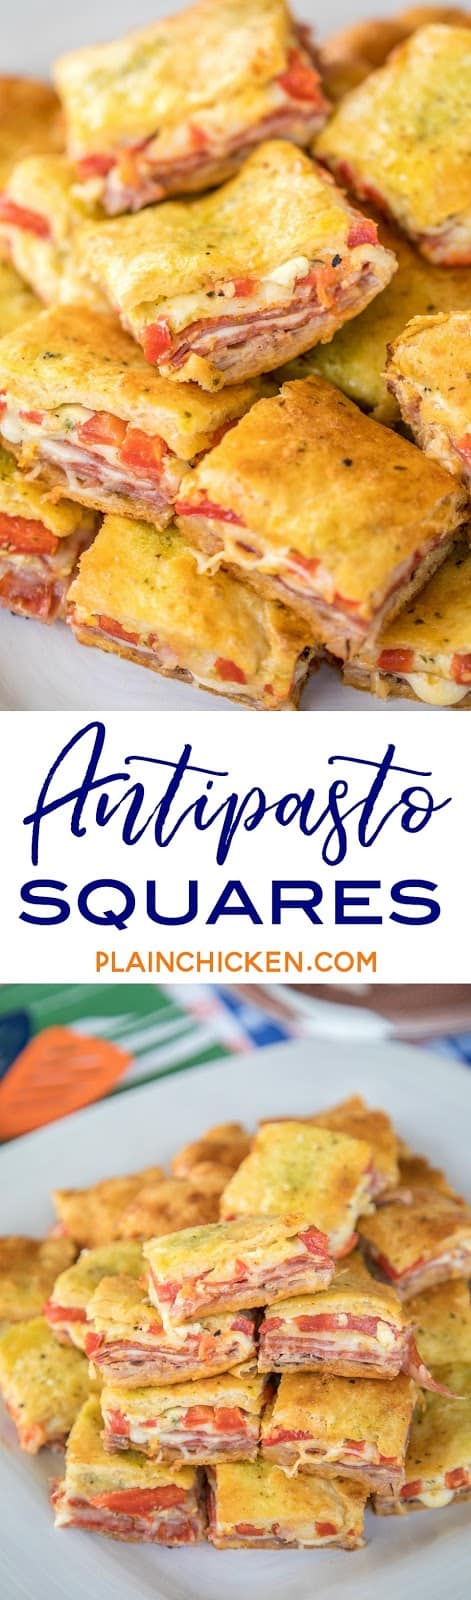 Antipasto Squares recipe - SO GOOD!! Crescent rolls stuffed with ham, salami, pepperoni, provolone, swiss, and roasted red peppers. then topped with a parmesan cheese, egg and pesto mixture and baked. These things are ridiculously good!!! There are never any leftovers when I take these to party! #appetizer #partyfood #crescentrolls